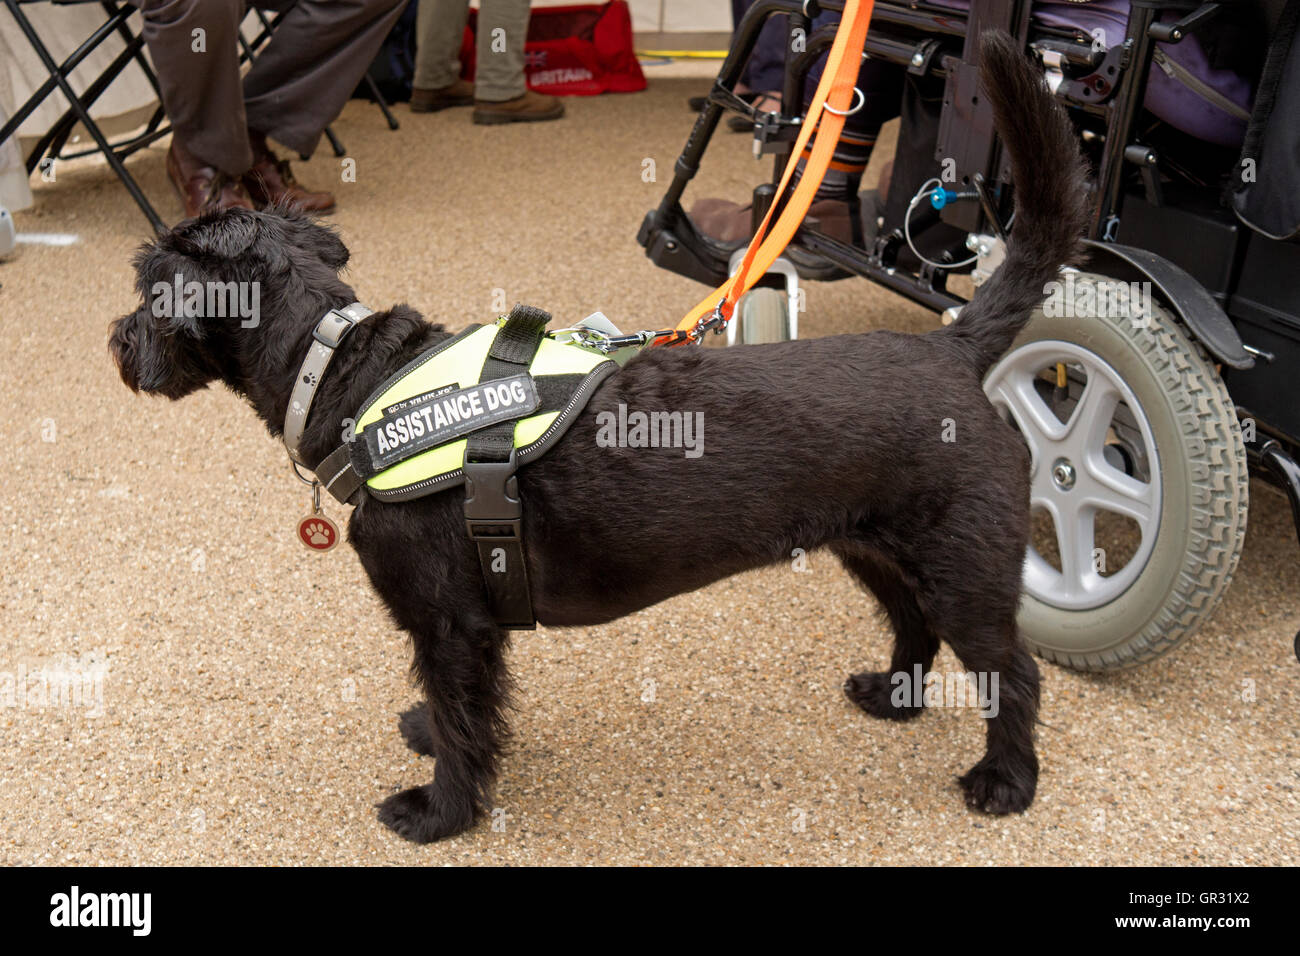 An assistance dog for the disabled. Stock Photo